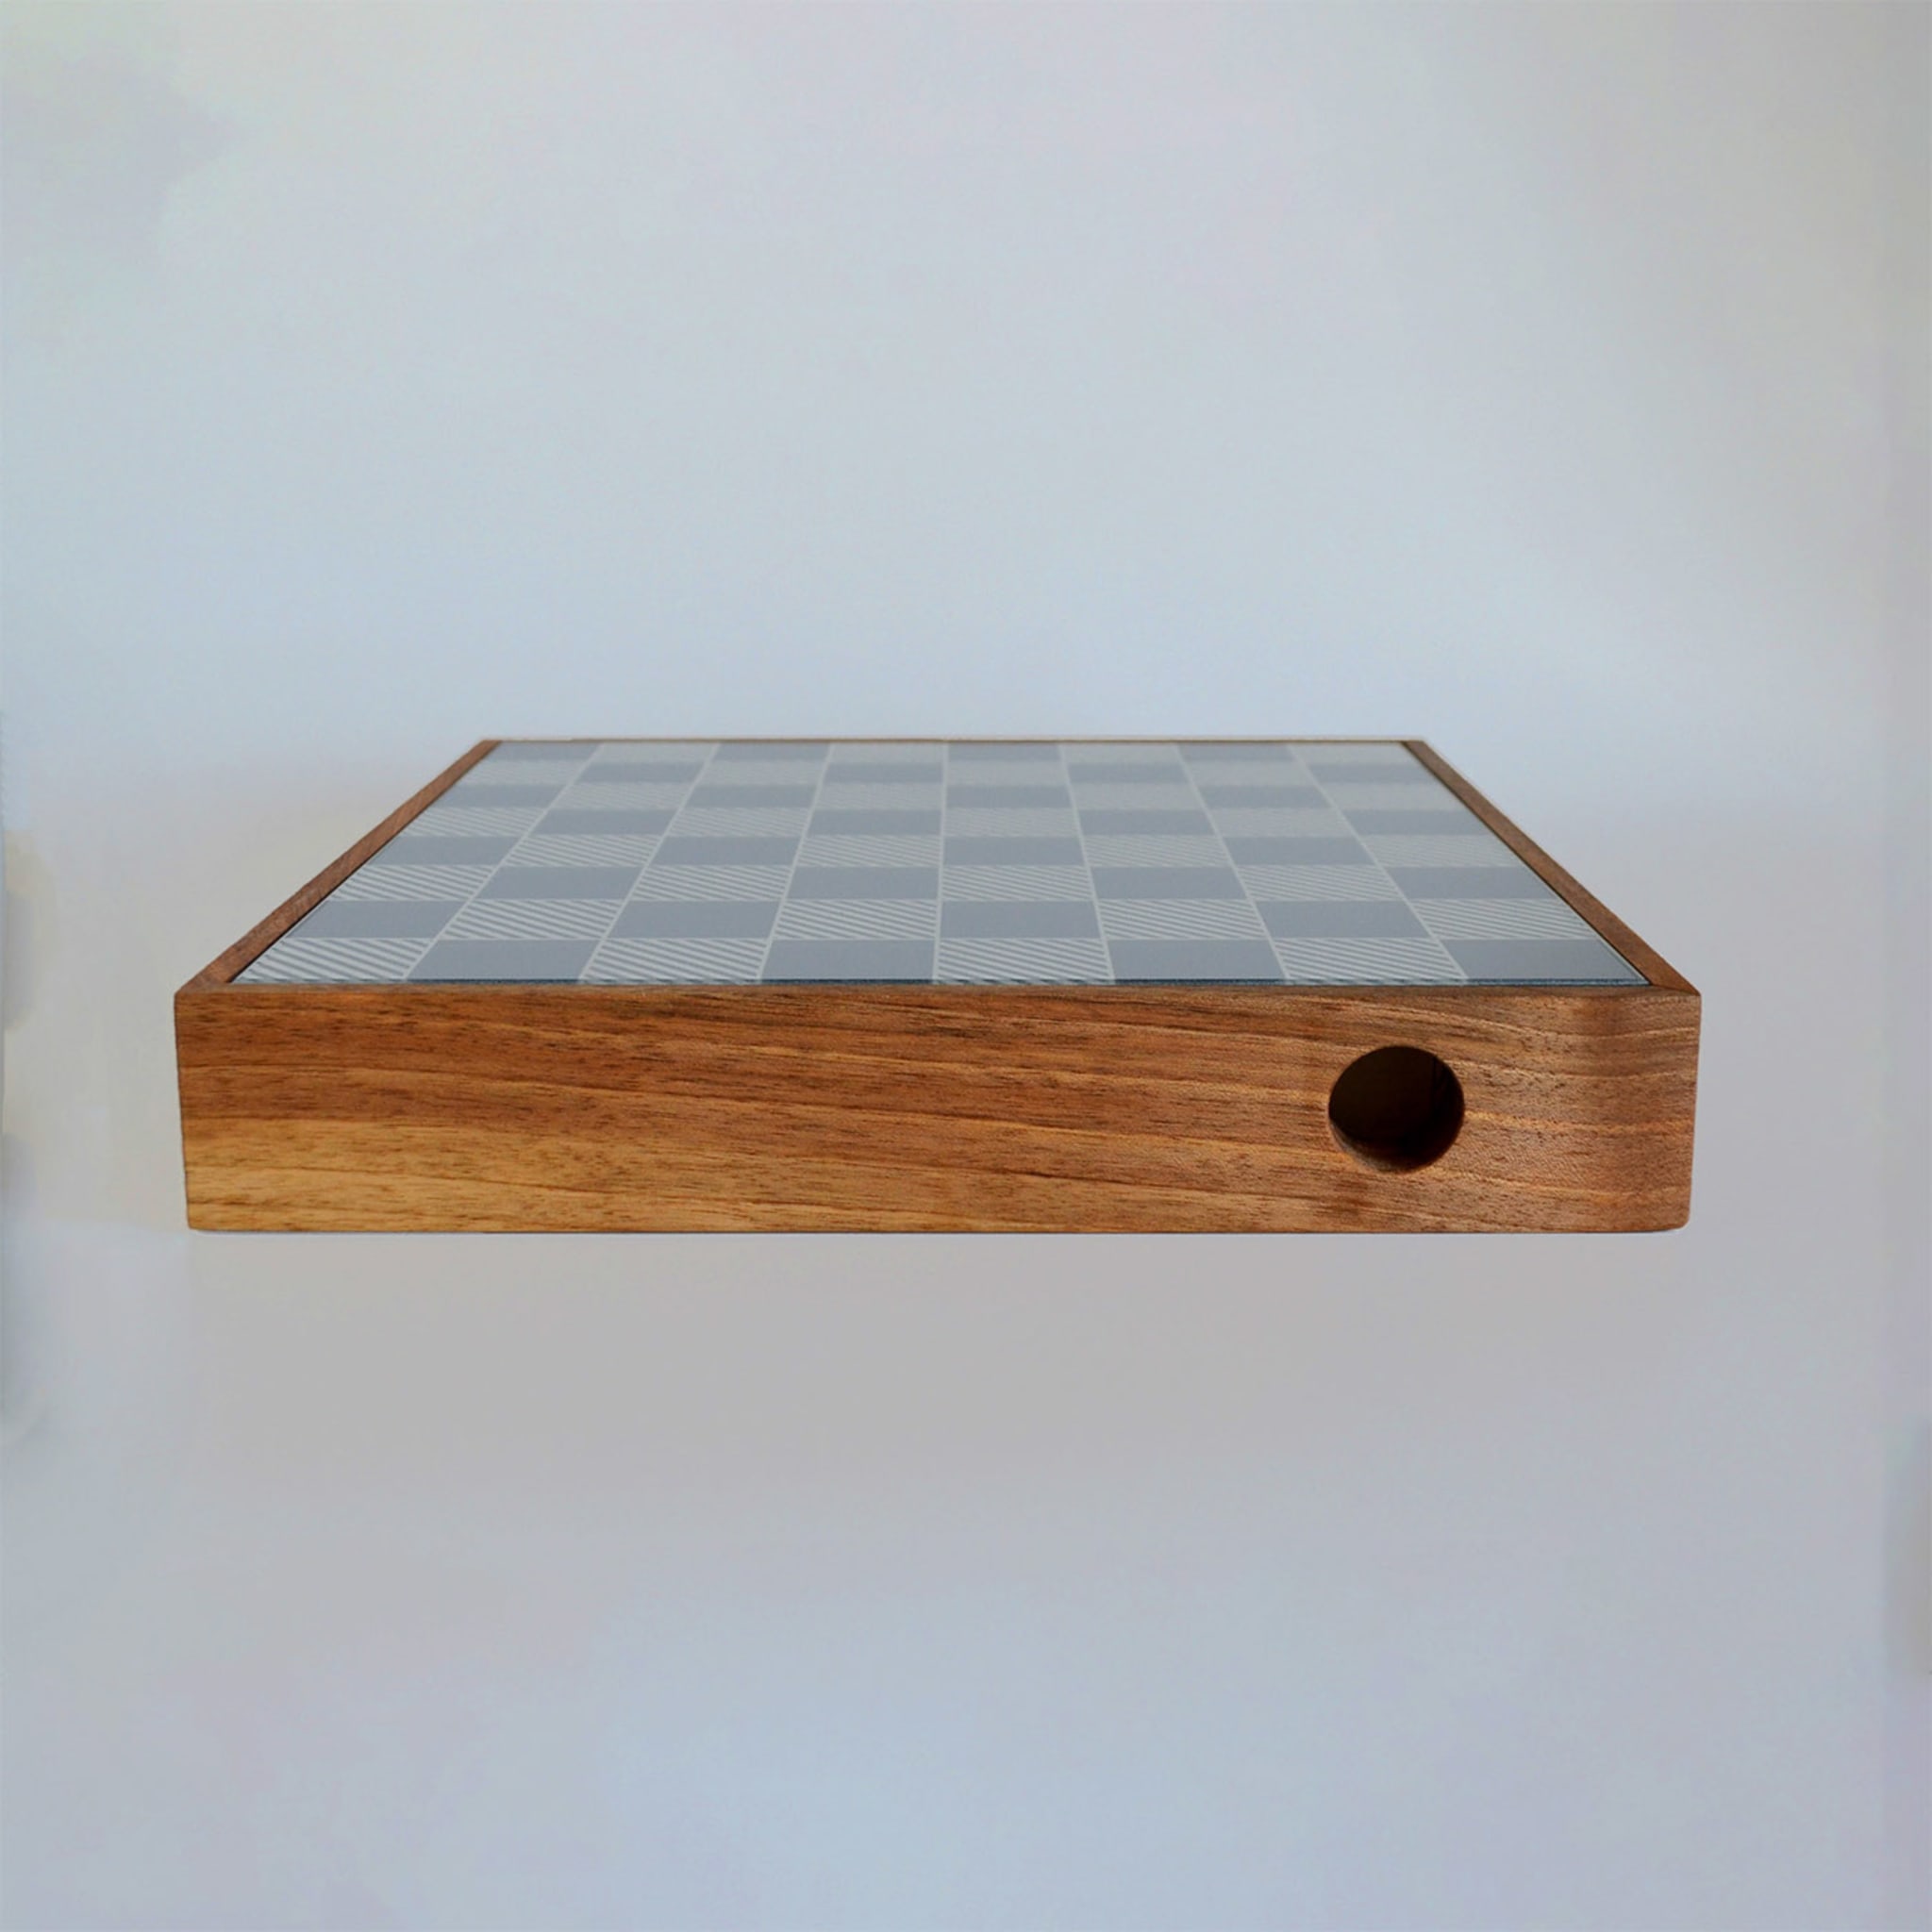 Chessboard by Marco Gavotto - Alternative view 3